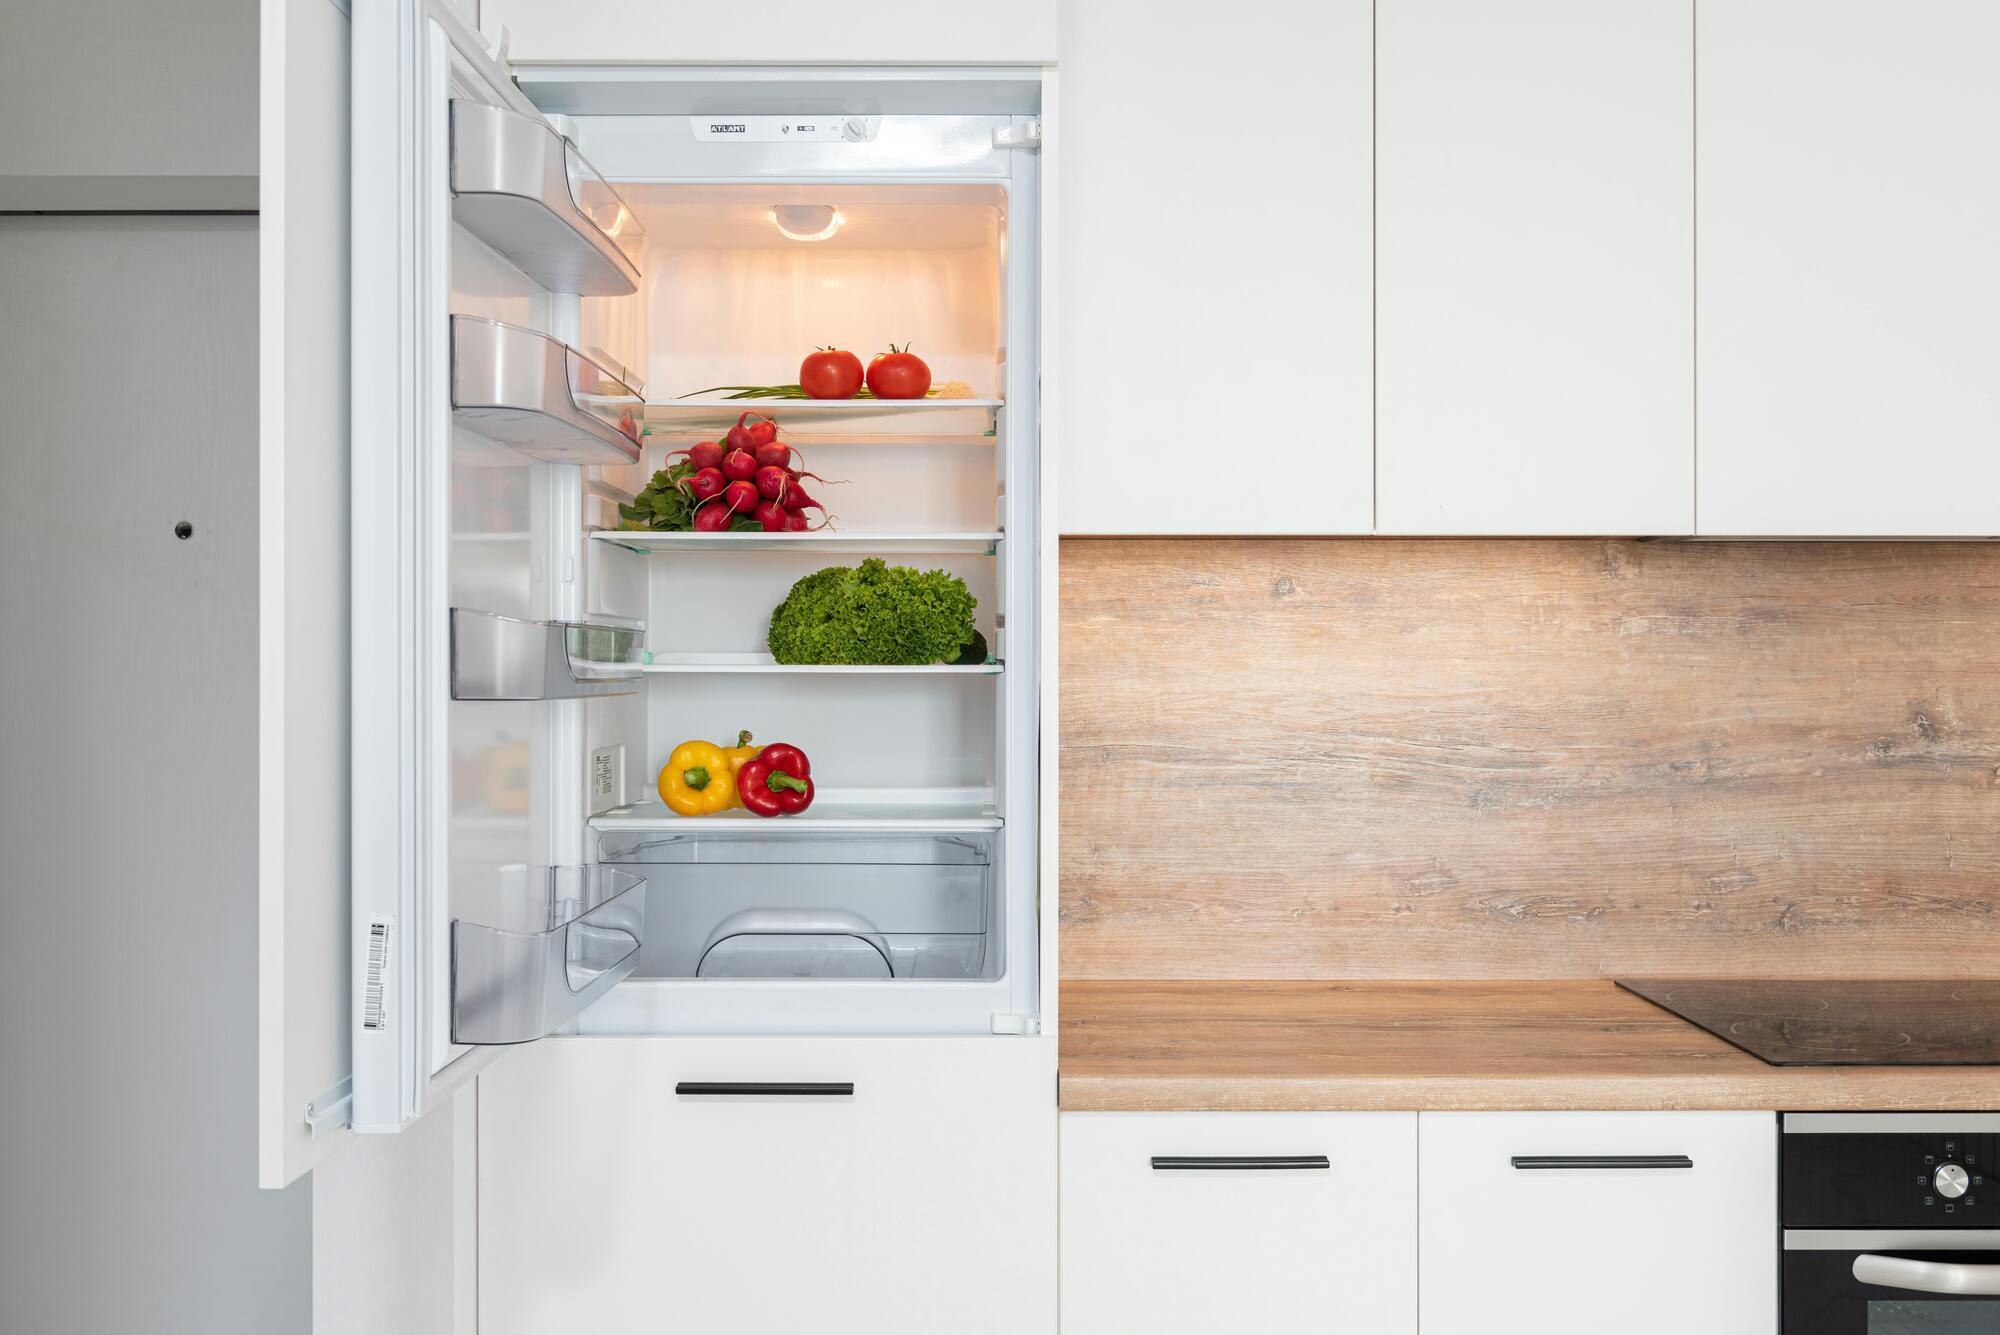 You are definitely filling your fridge wrong: the best places for groceries are named